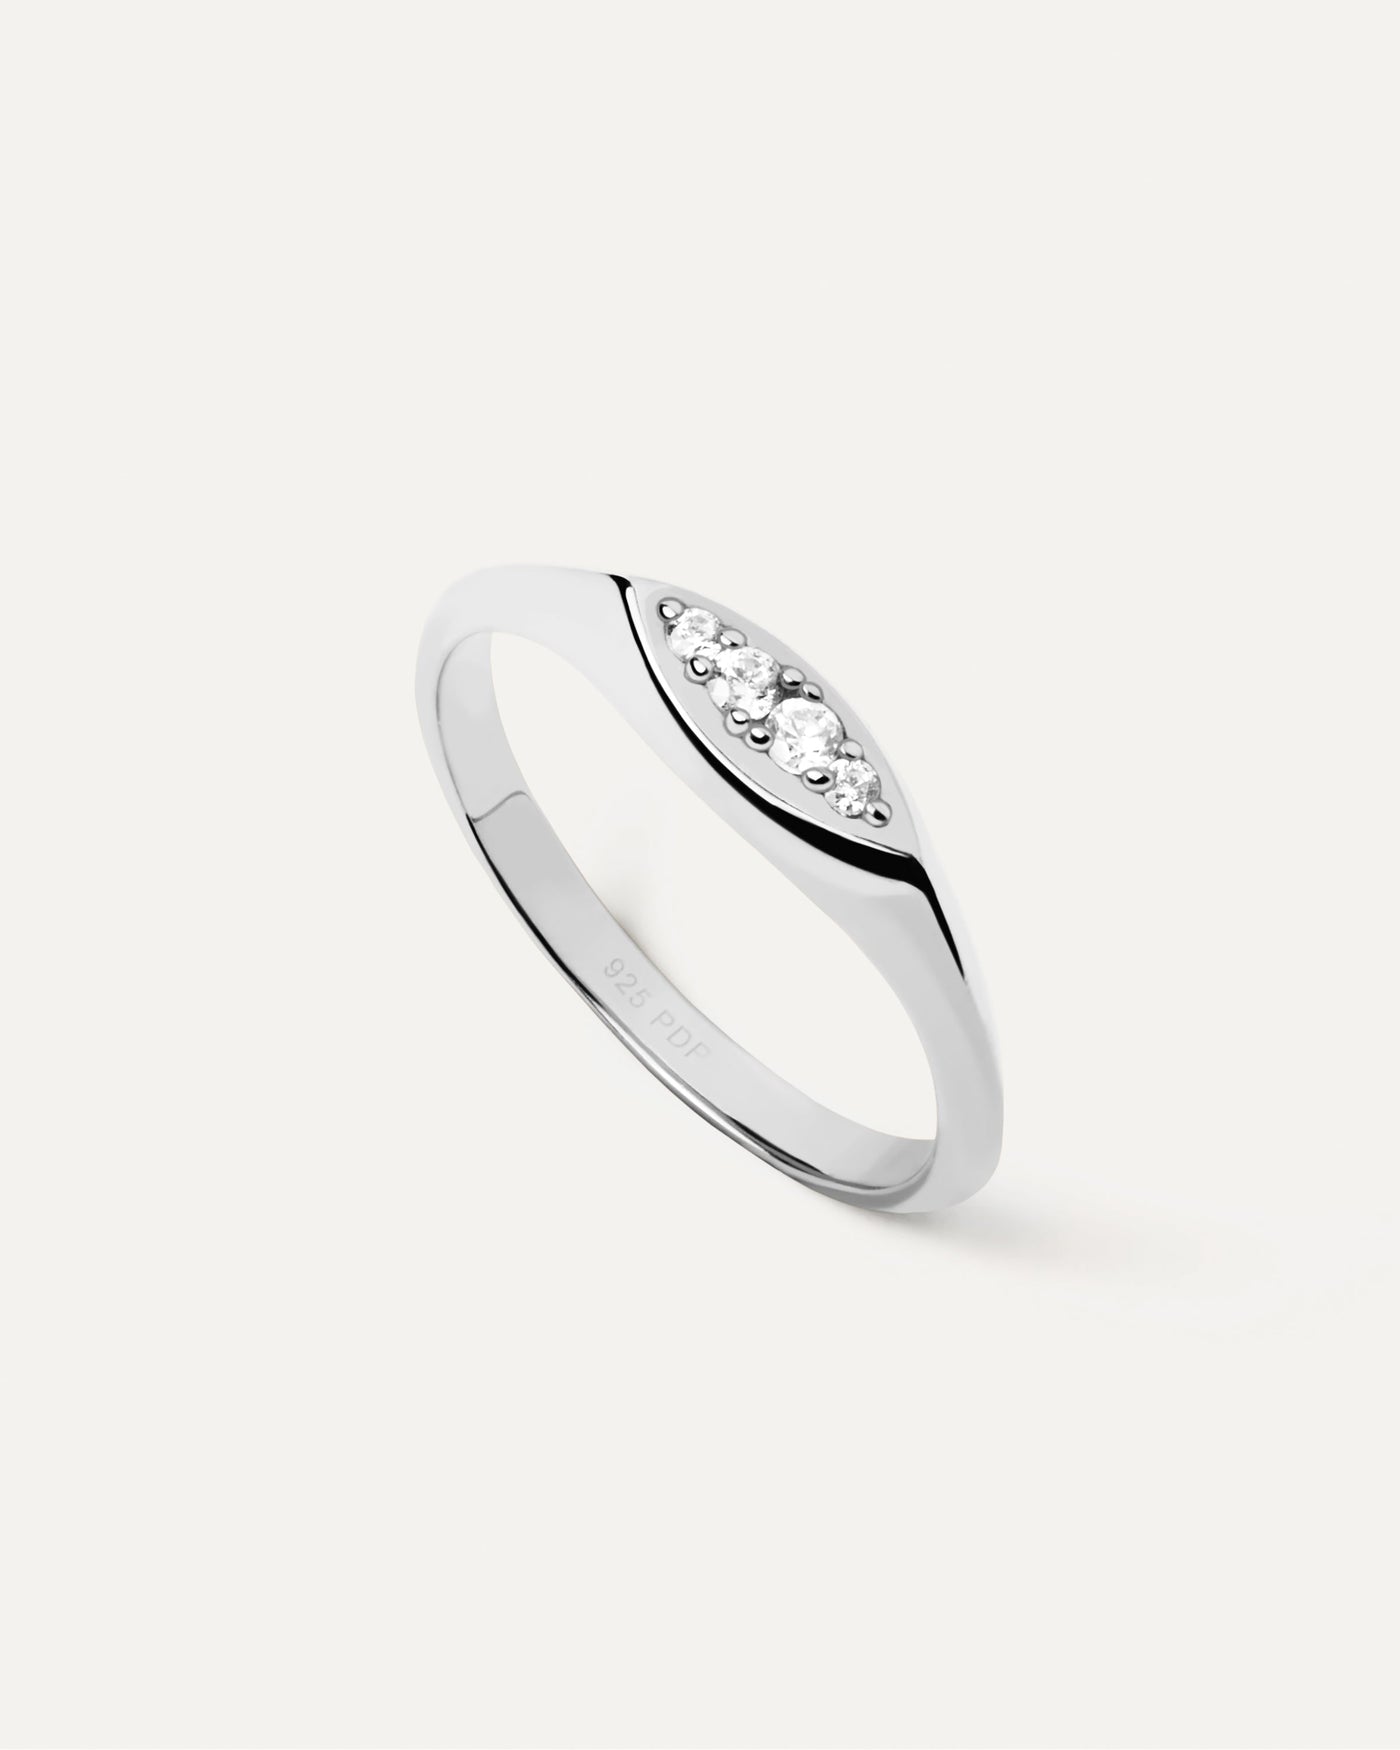 2023 Selection |  Gala Stamp Silver Ring. Sterling silver slim signet ring set with eye shape white zirconia multi-stone cluster. Get the latest arrival from PDPAOLA. Place your order safely and get this Best Seller. Free Shipping.